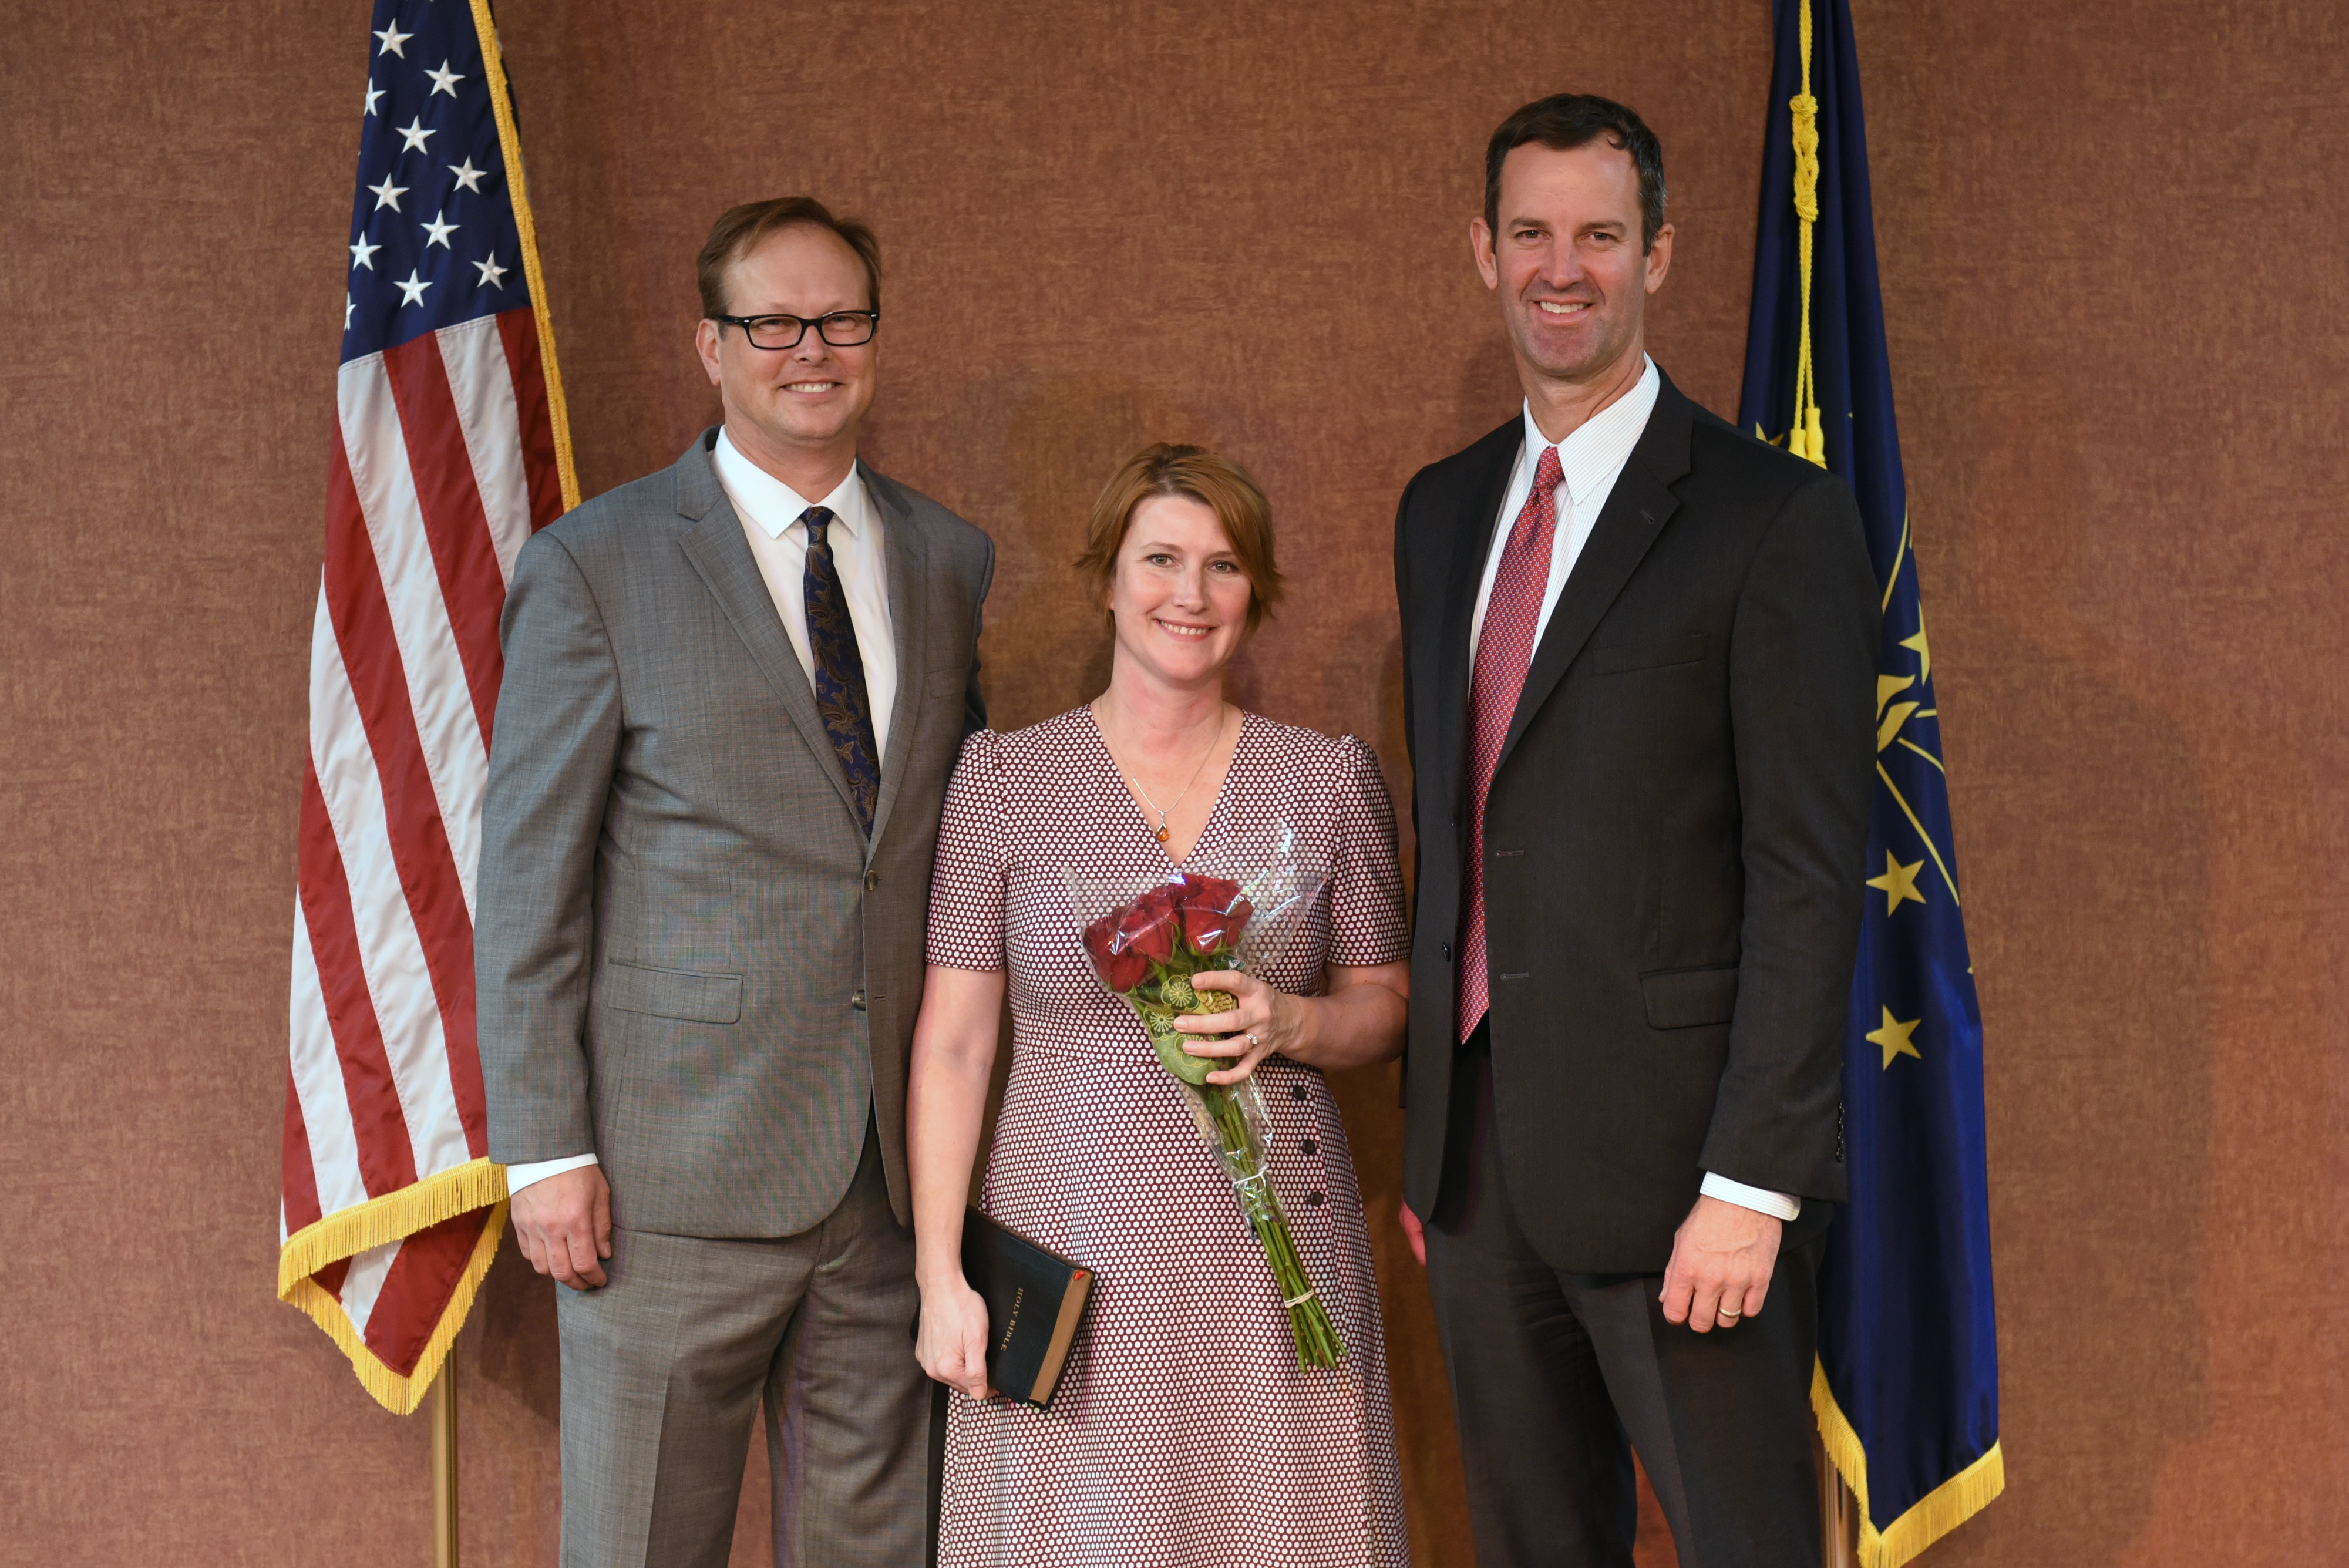 Stephen Cox with Wife and IDHS Director Langley